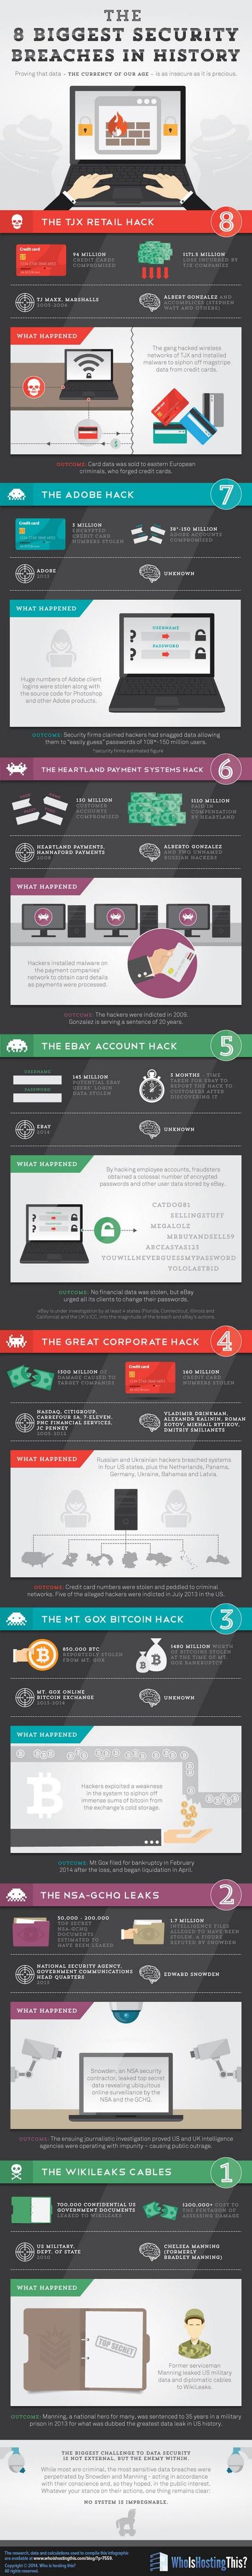 biggest-security-breaches-infographic